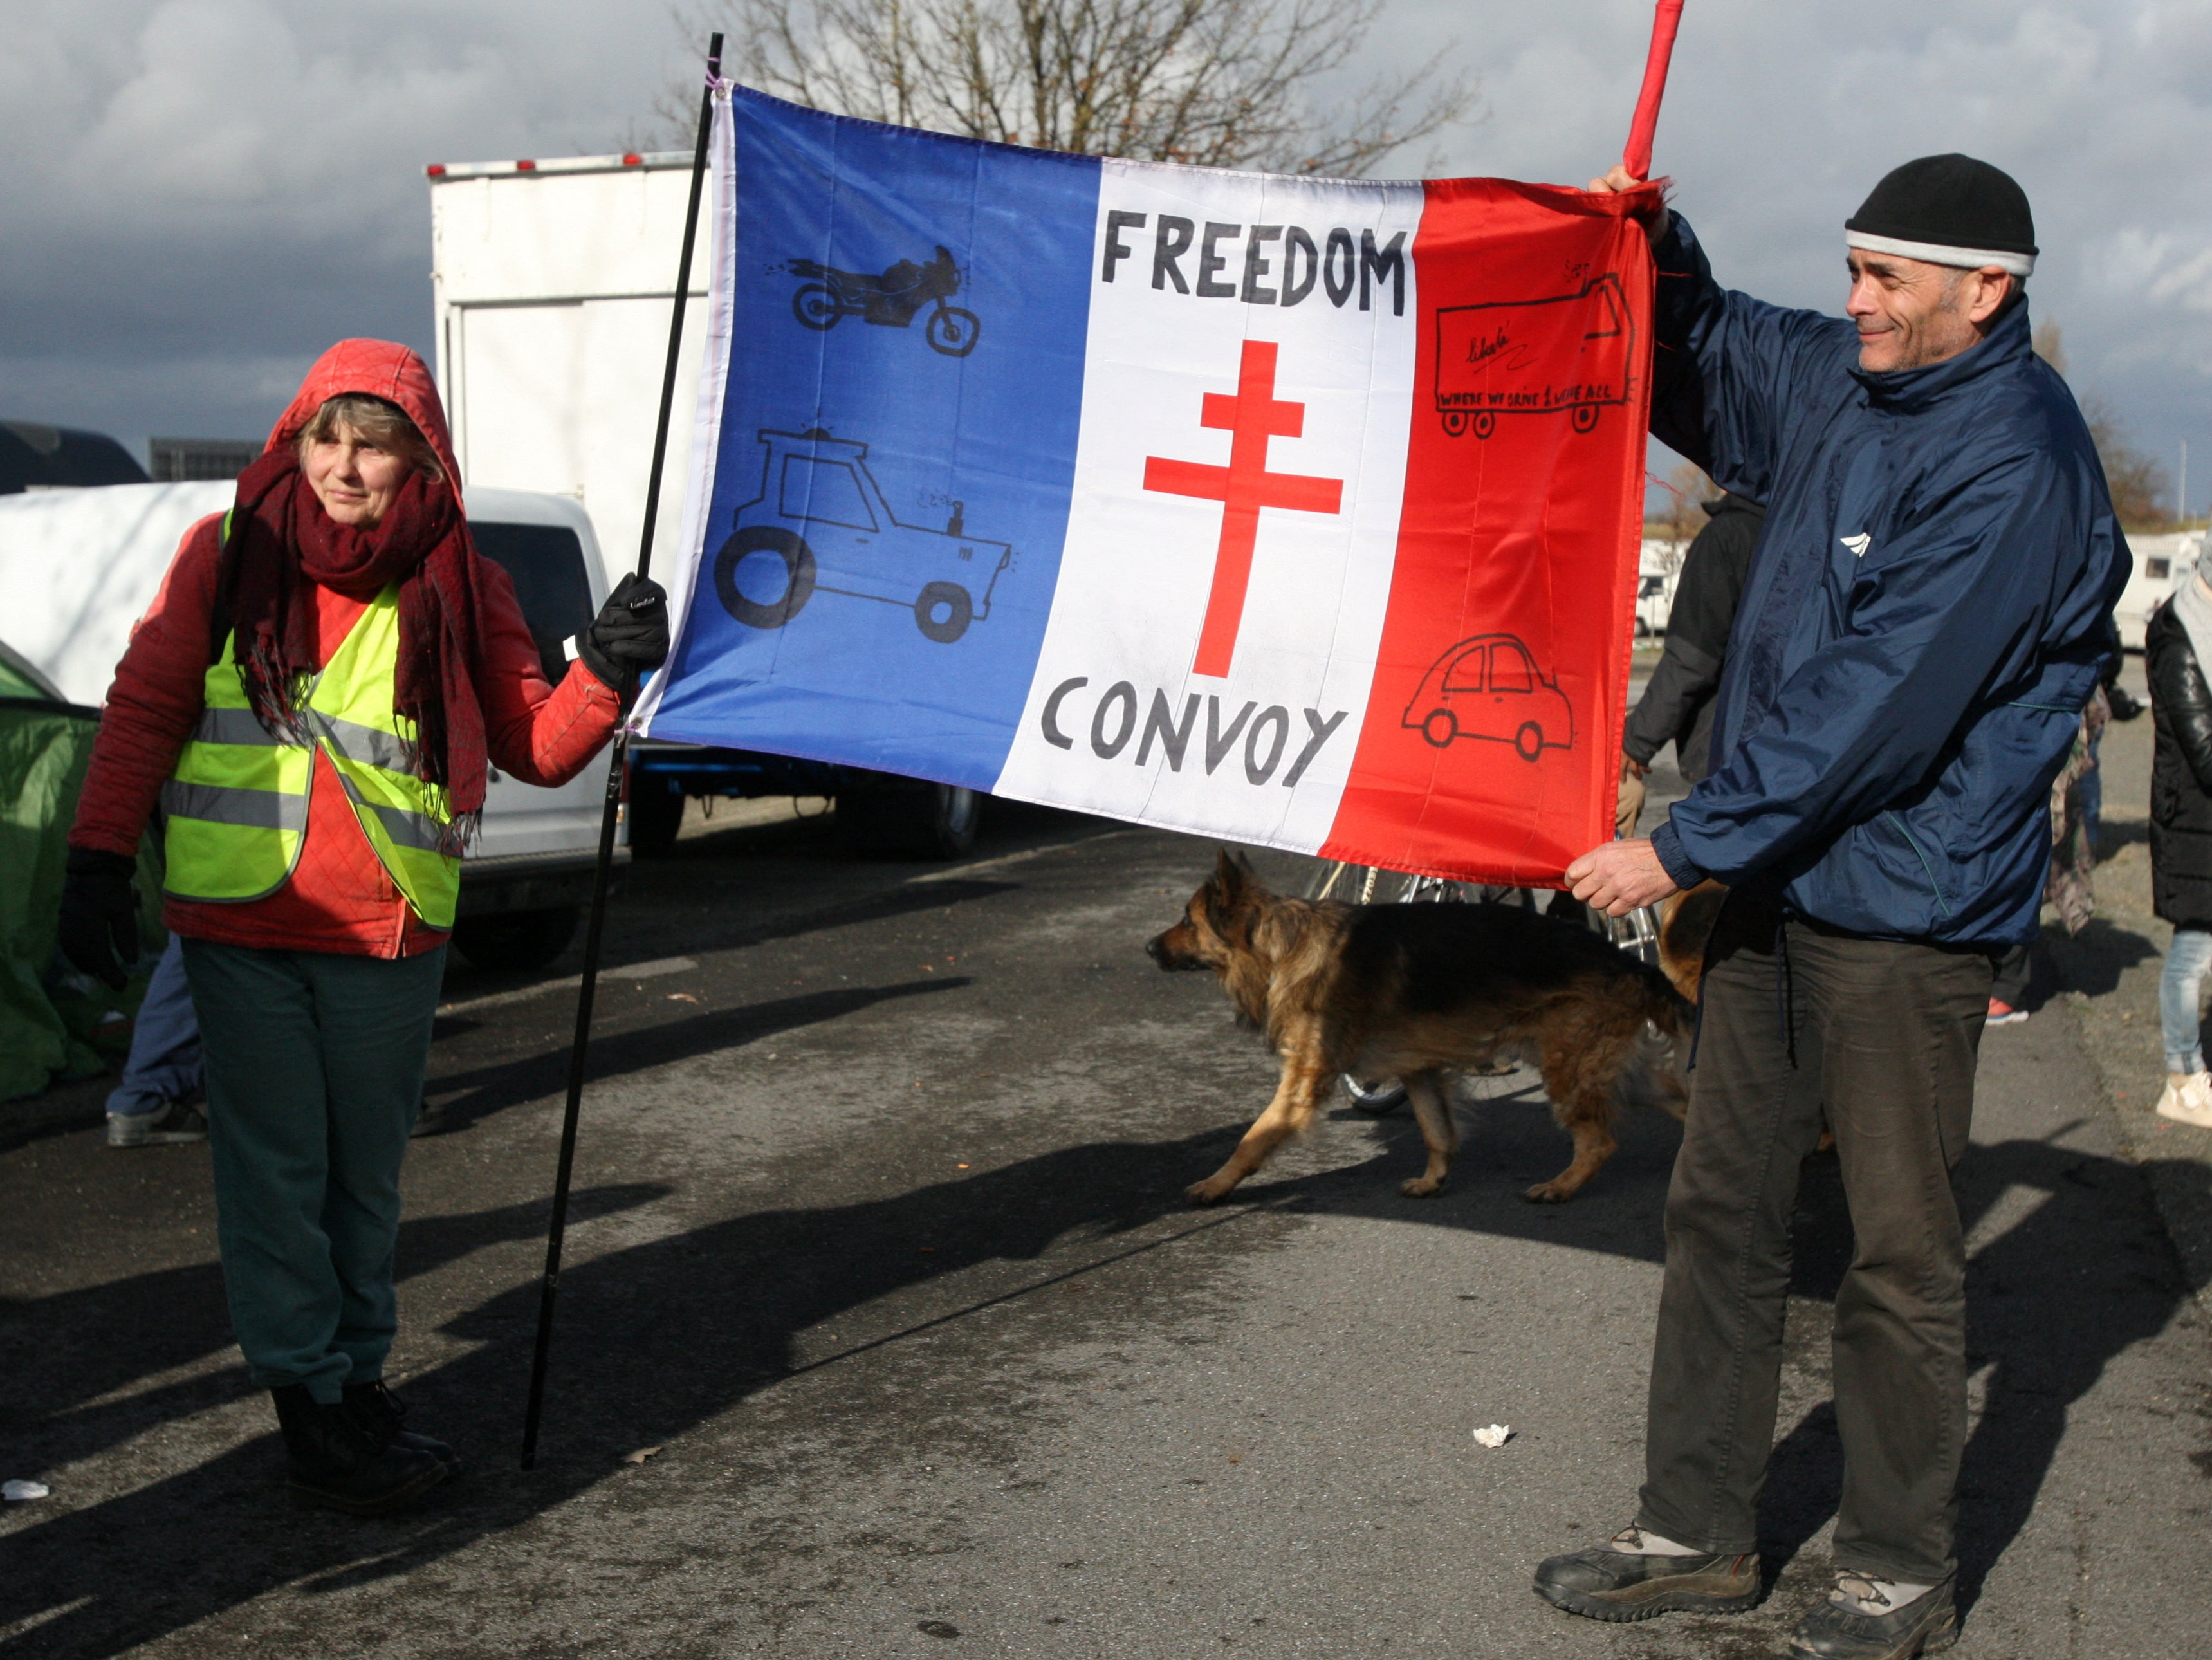 Demonstrators protesting against Covid restrictions as part of ‘European Freedom Convoy 2022’ wait in a car park in Brussels